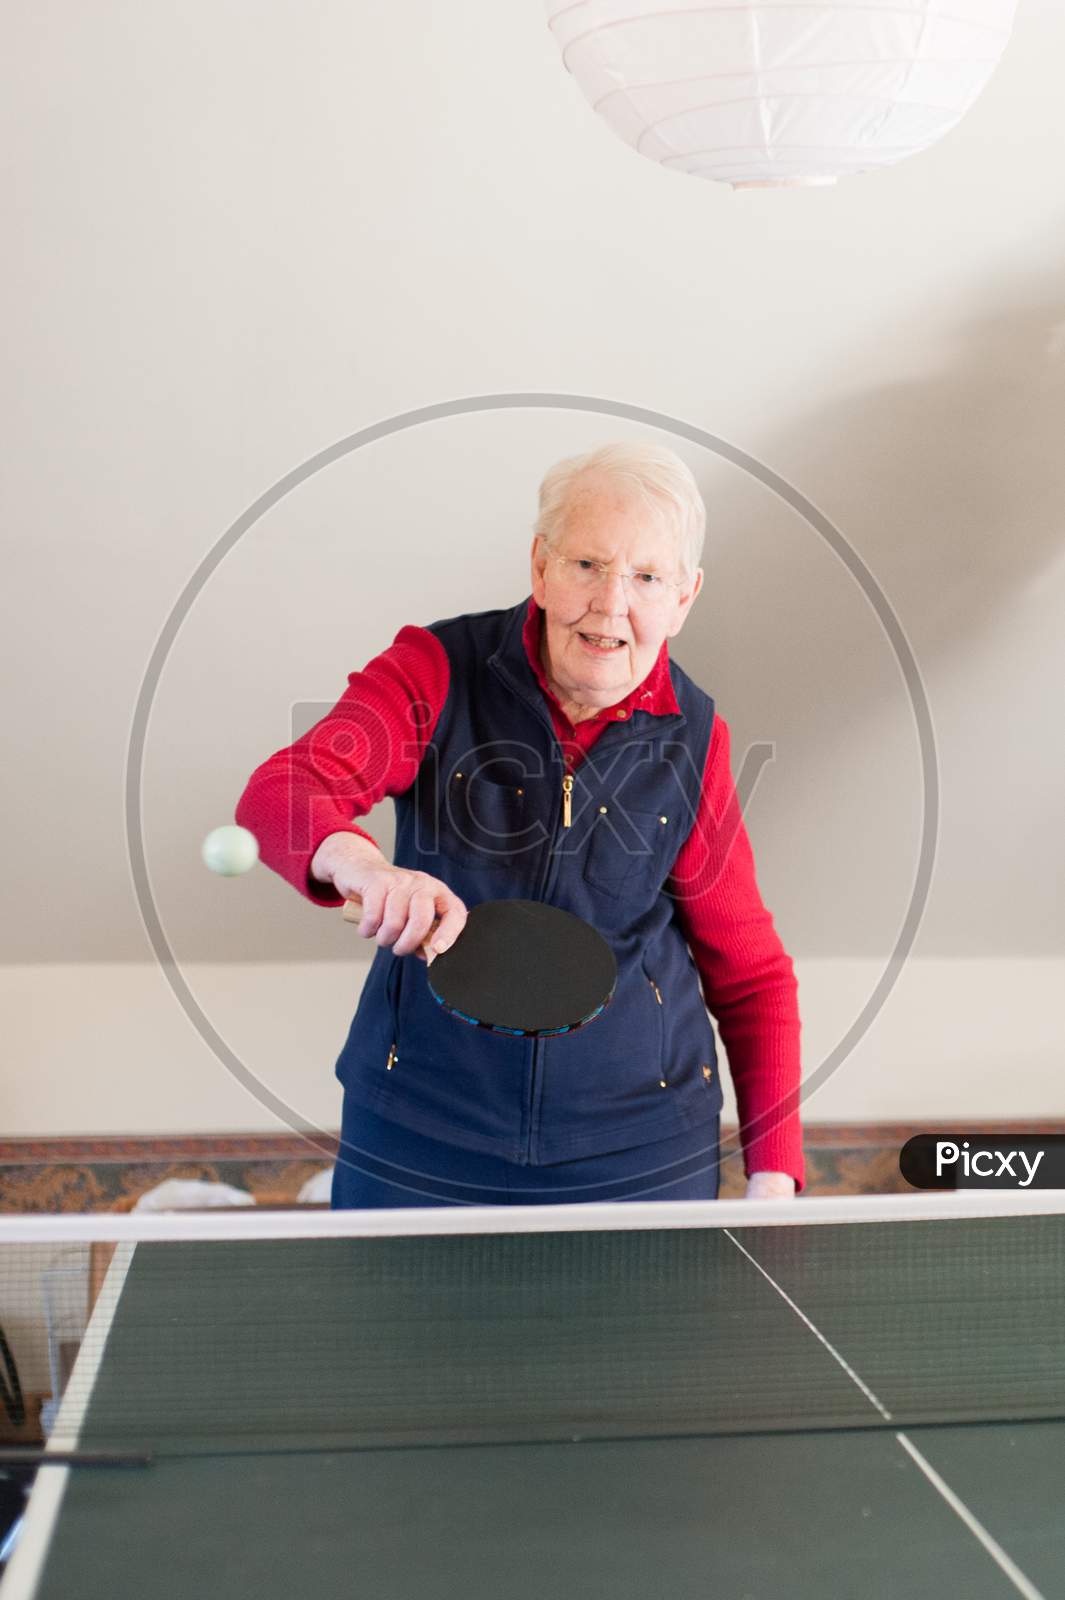 An Elderly Lady Playing Table Tennis